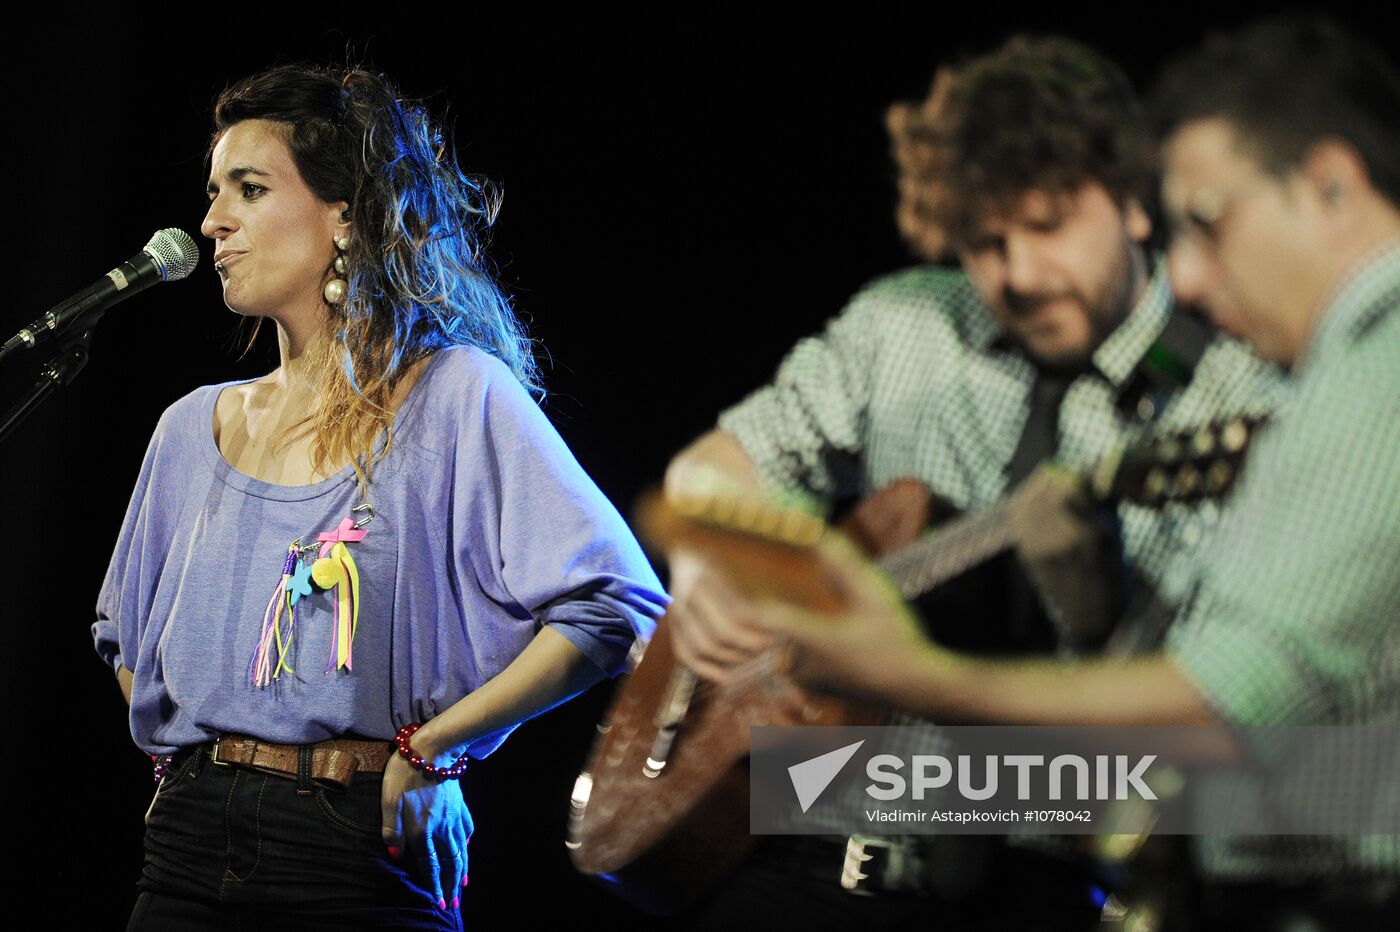 Spanish singer Bebe performs in Moscow